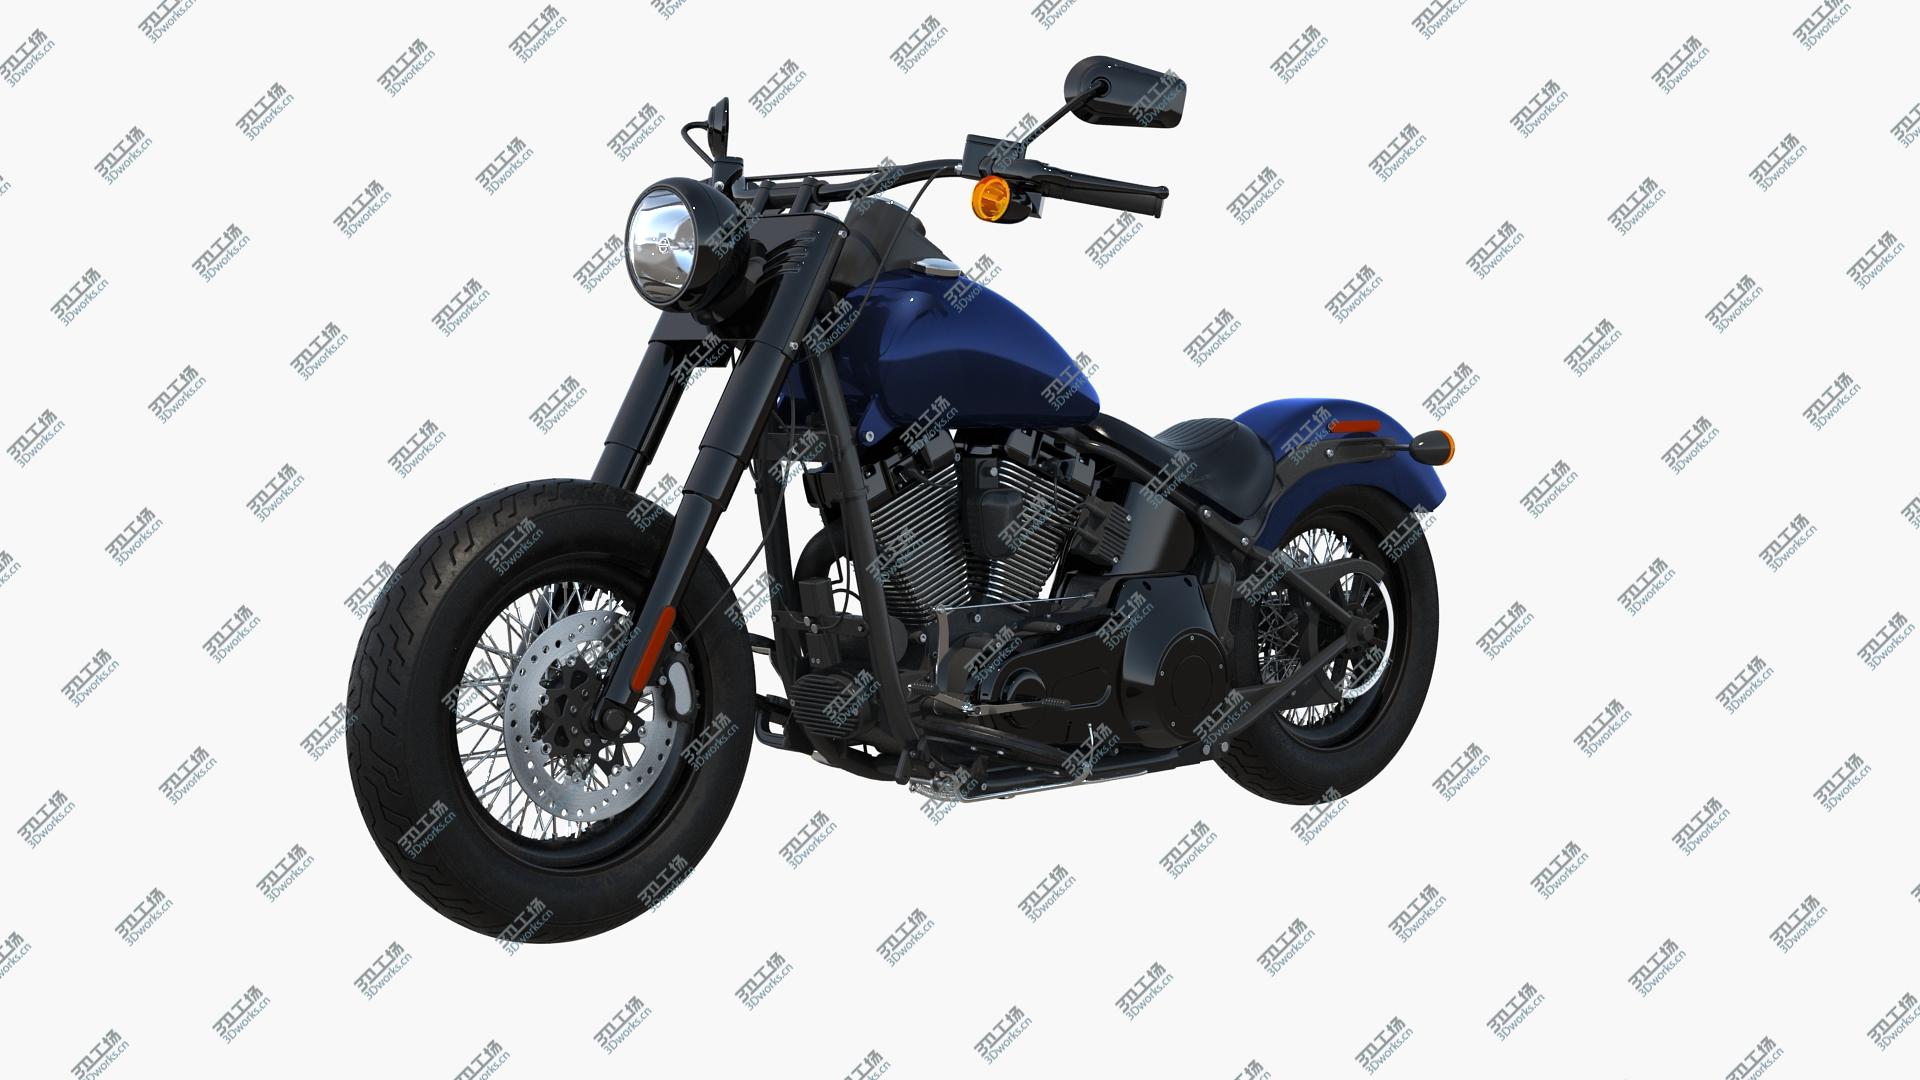 images/goods_img/202104091/Softail Motorcycle 3D model/2.jpg